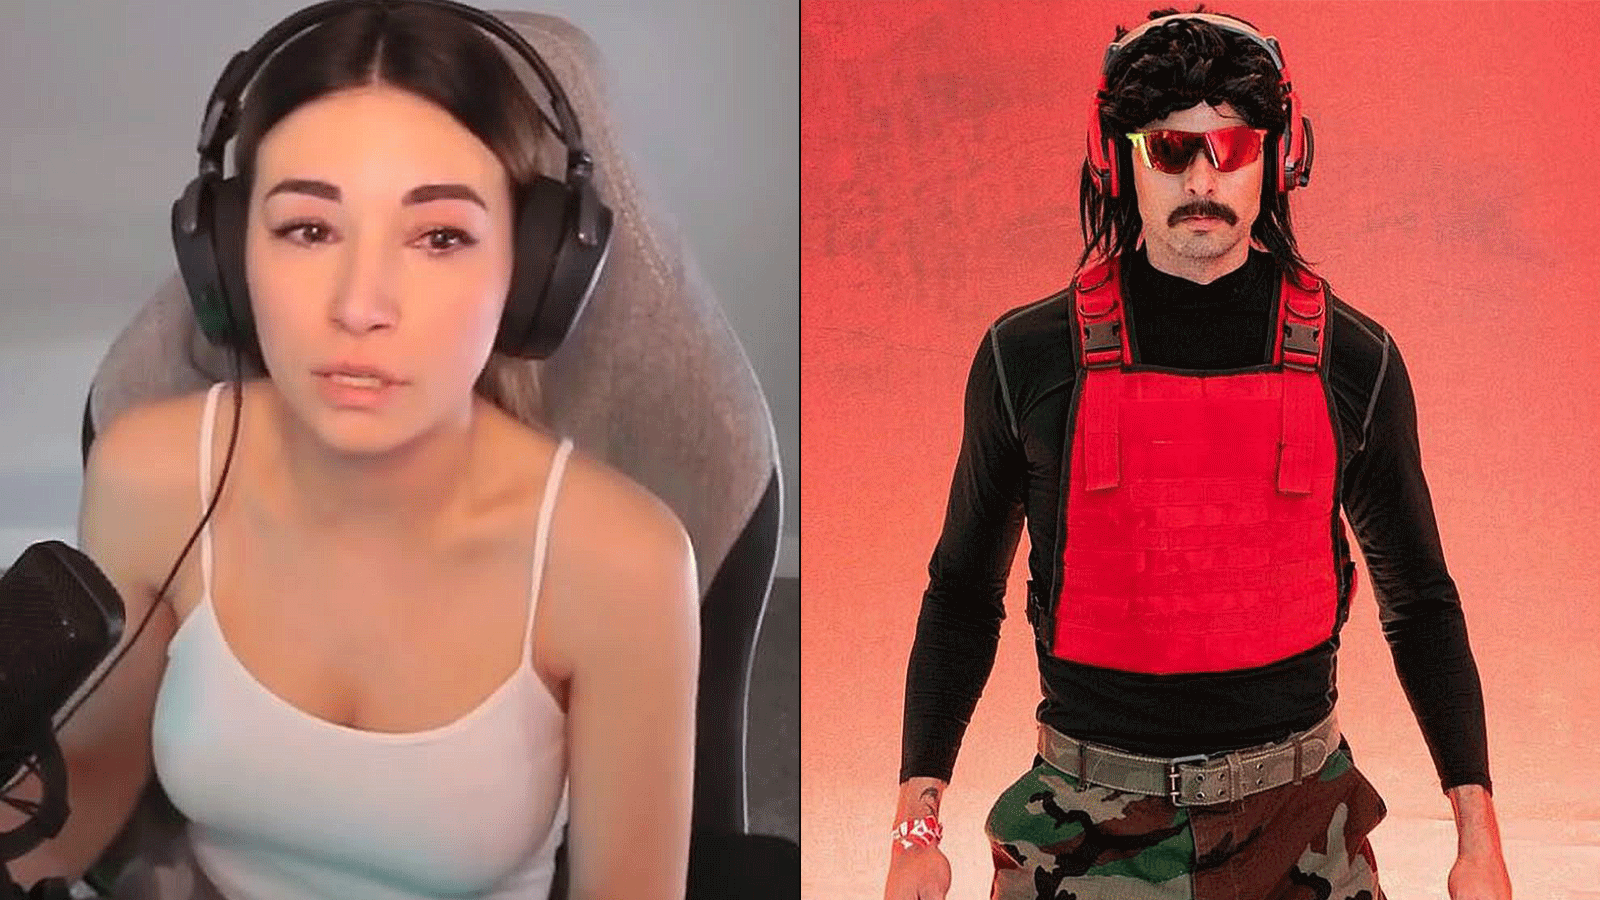 aj muller share dr disrespect wife pictures photos